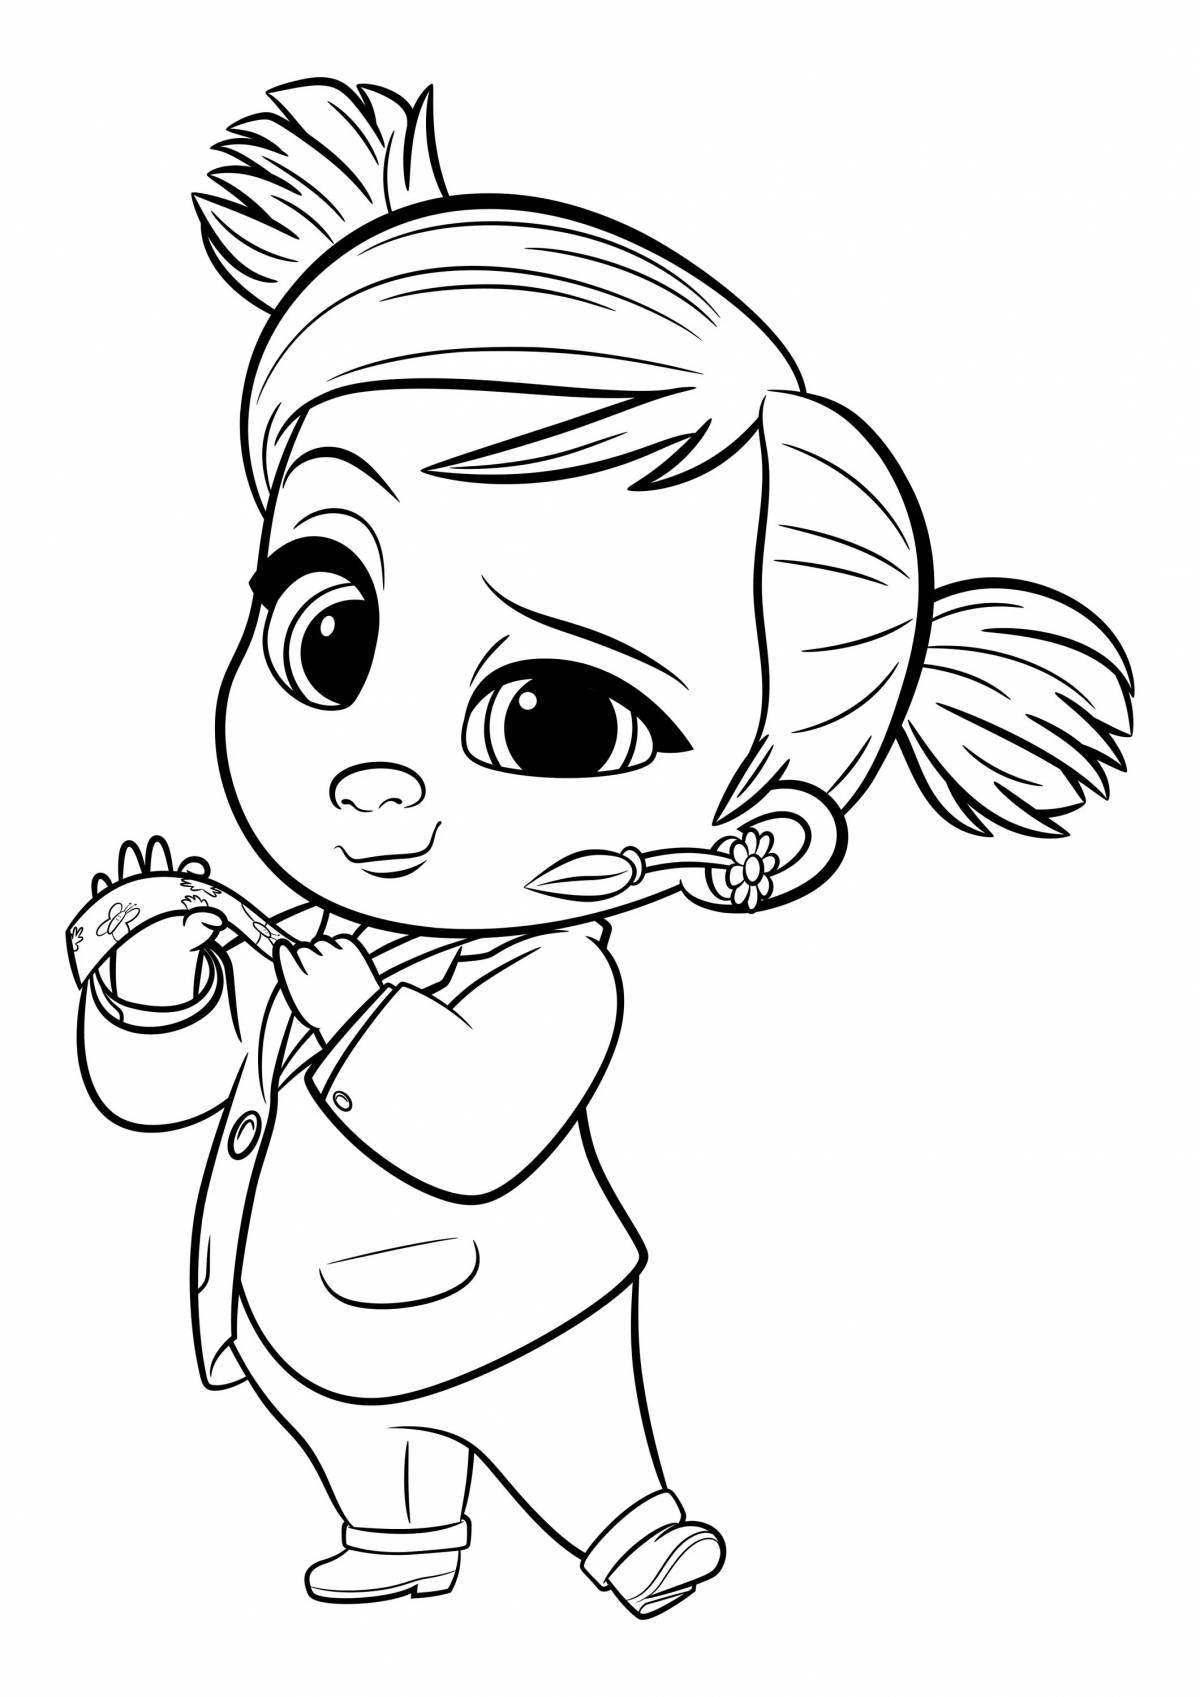 Naughty baby boss coloring page